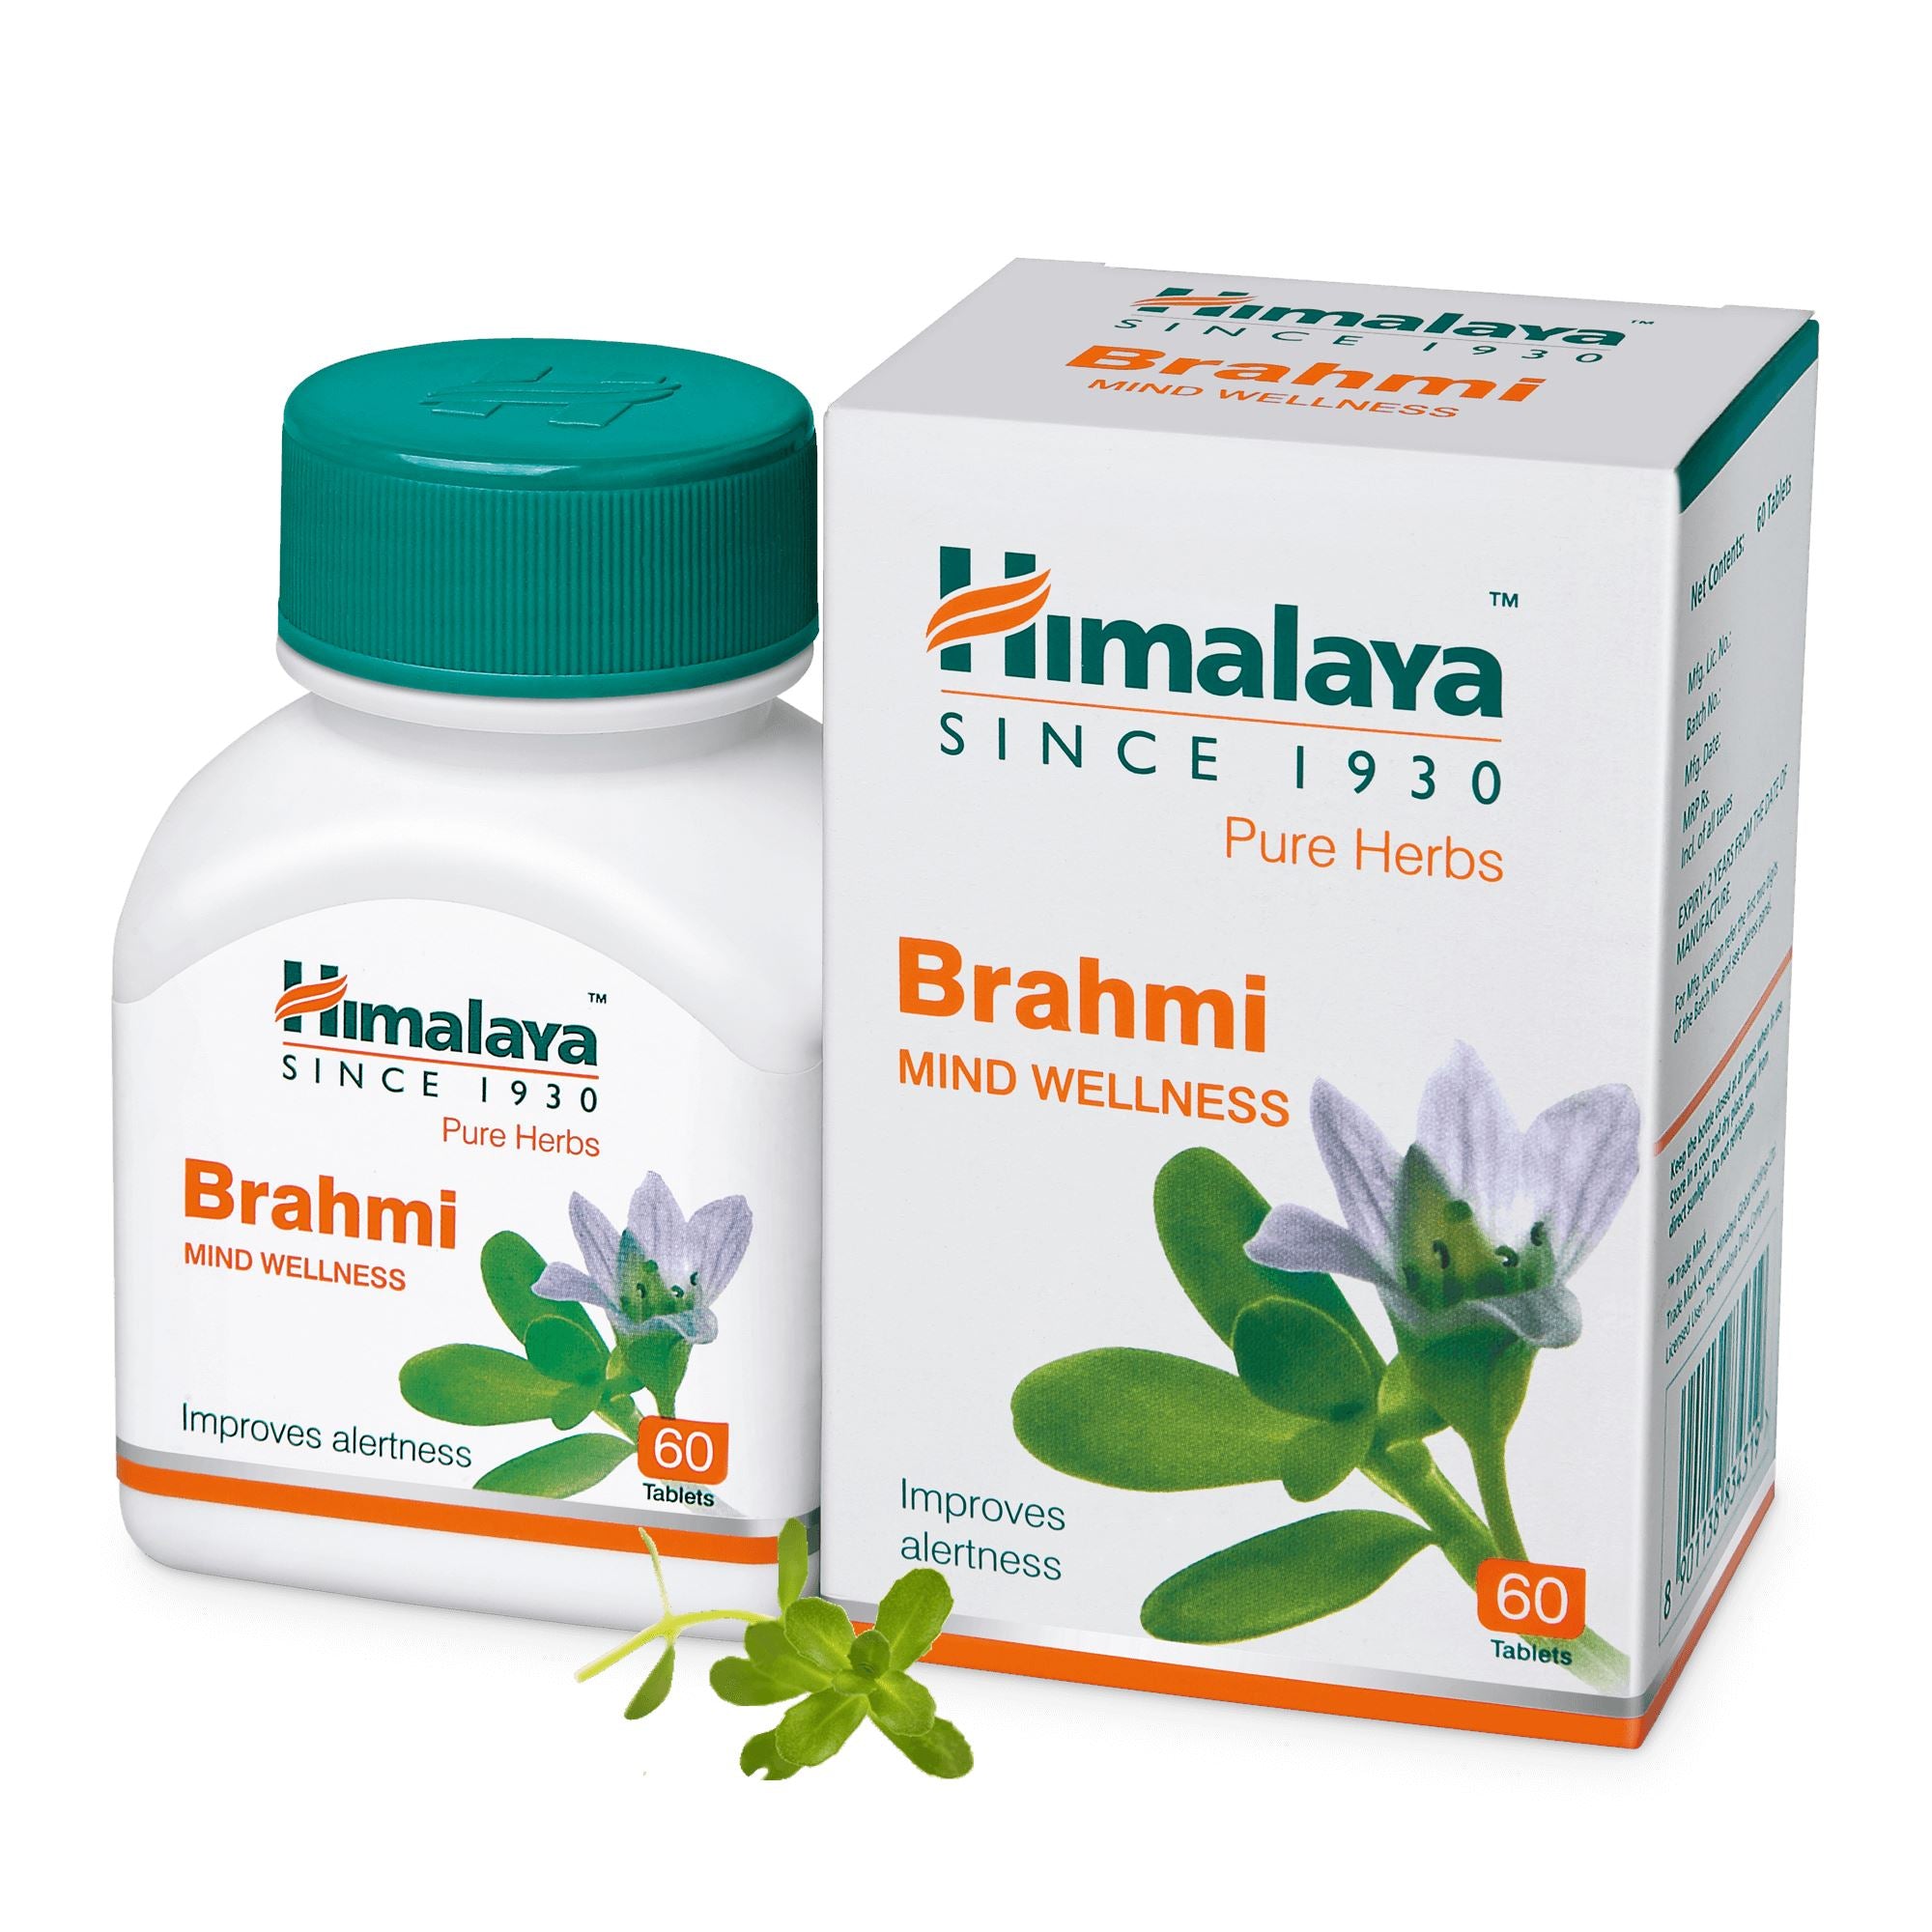 Himalaya Brahmi 60 Tablets - Helps calm the mind, promote clarity of thought, and memory consolidation